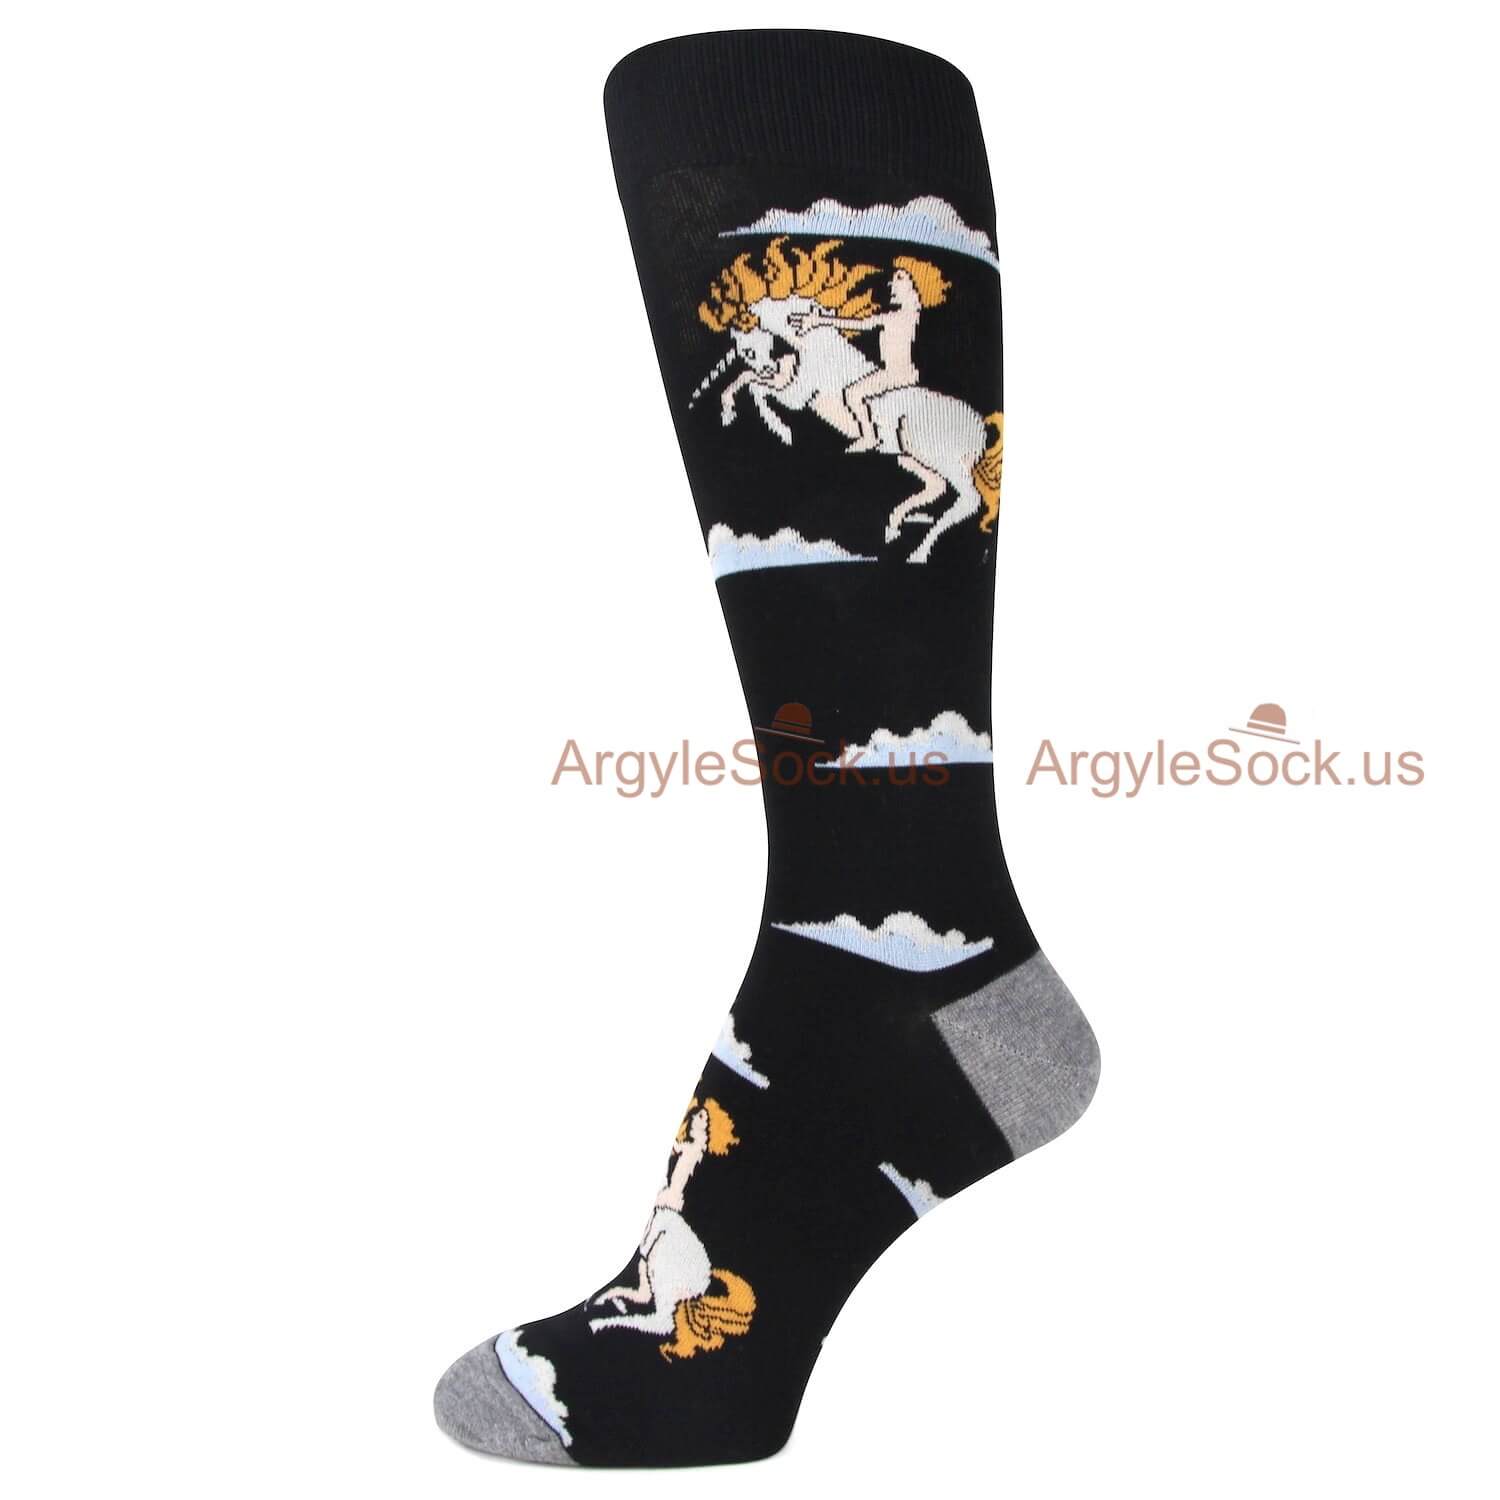 Black with Unicorn and Knight Themed Socks for Men